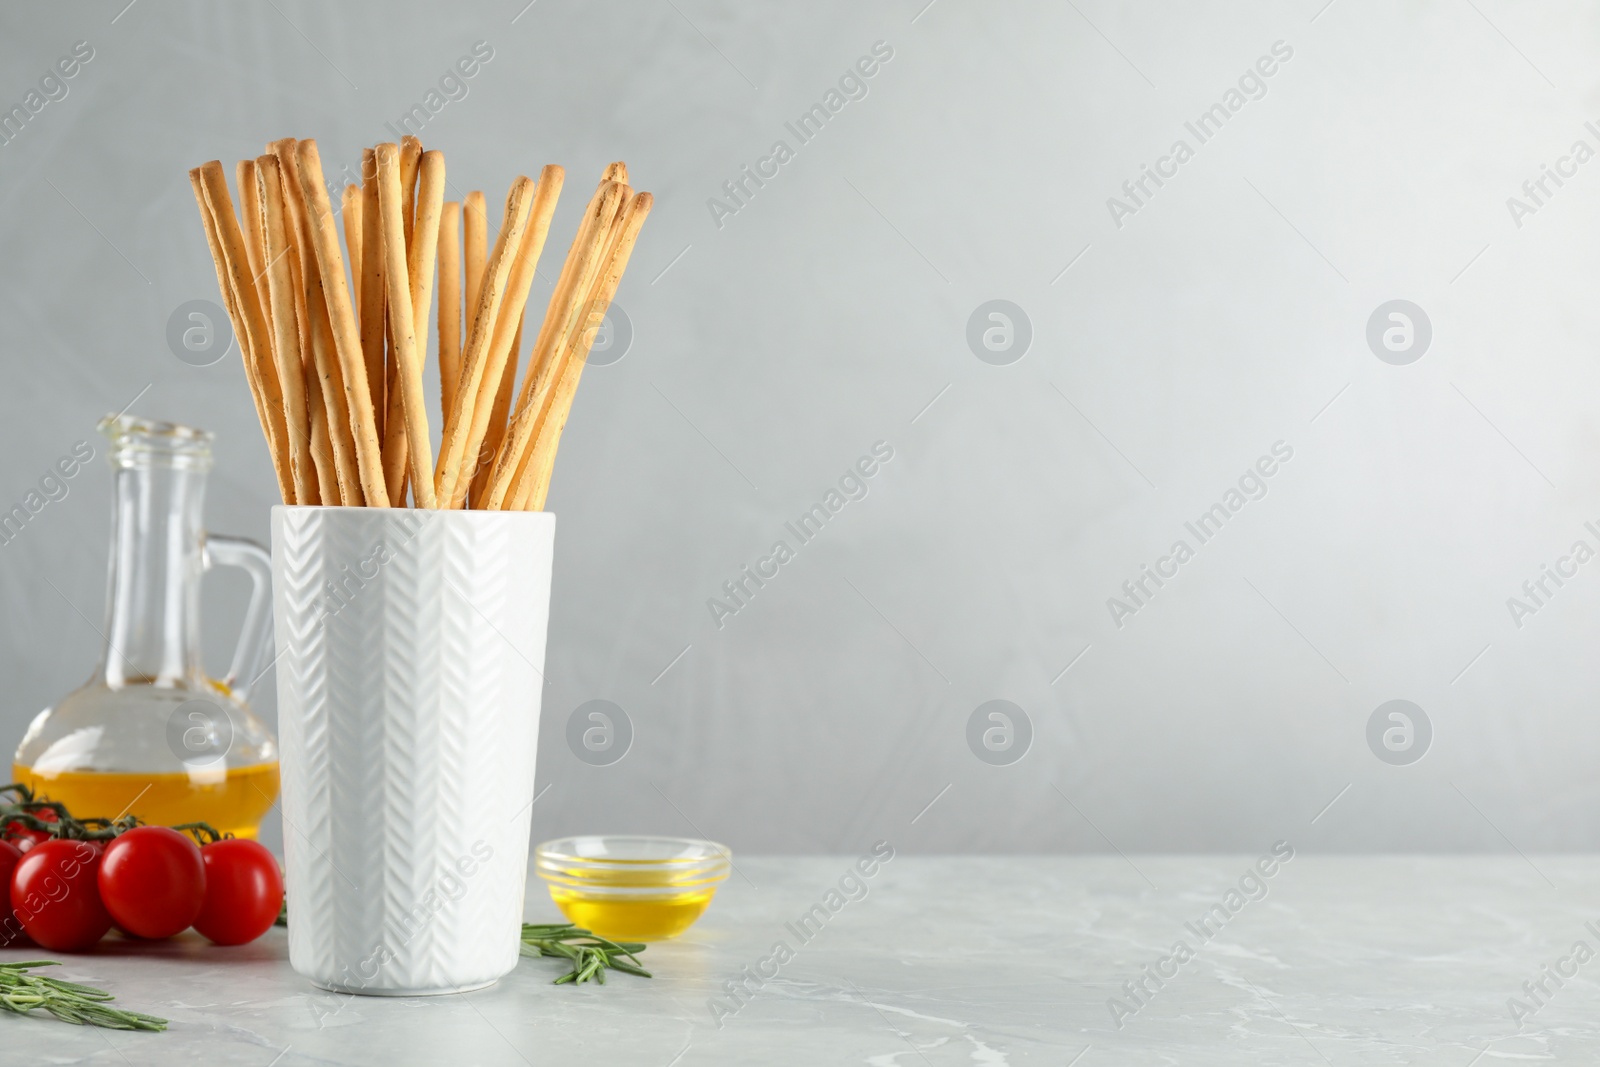 Photo of Delicious grissini sticks, oil, rosemary and tomatoes on grey marble table. Space for text